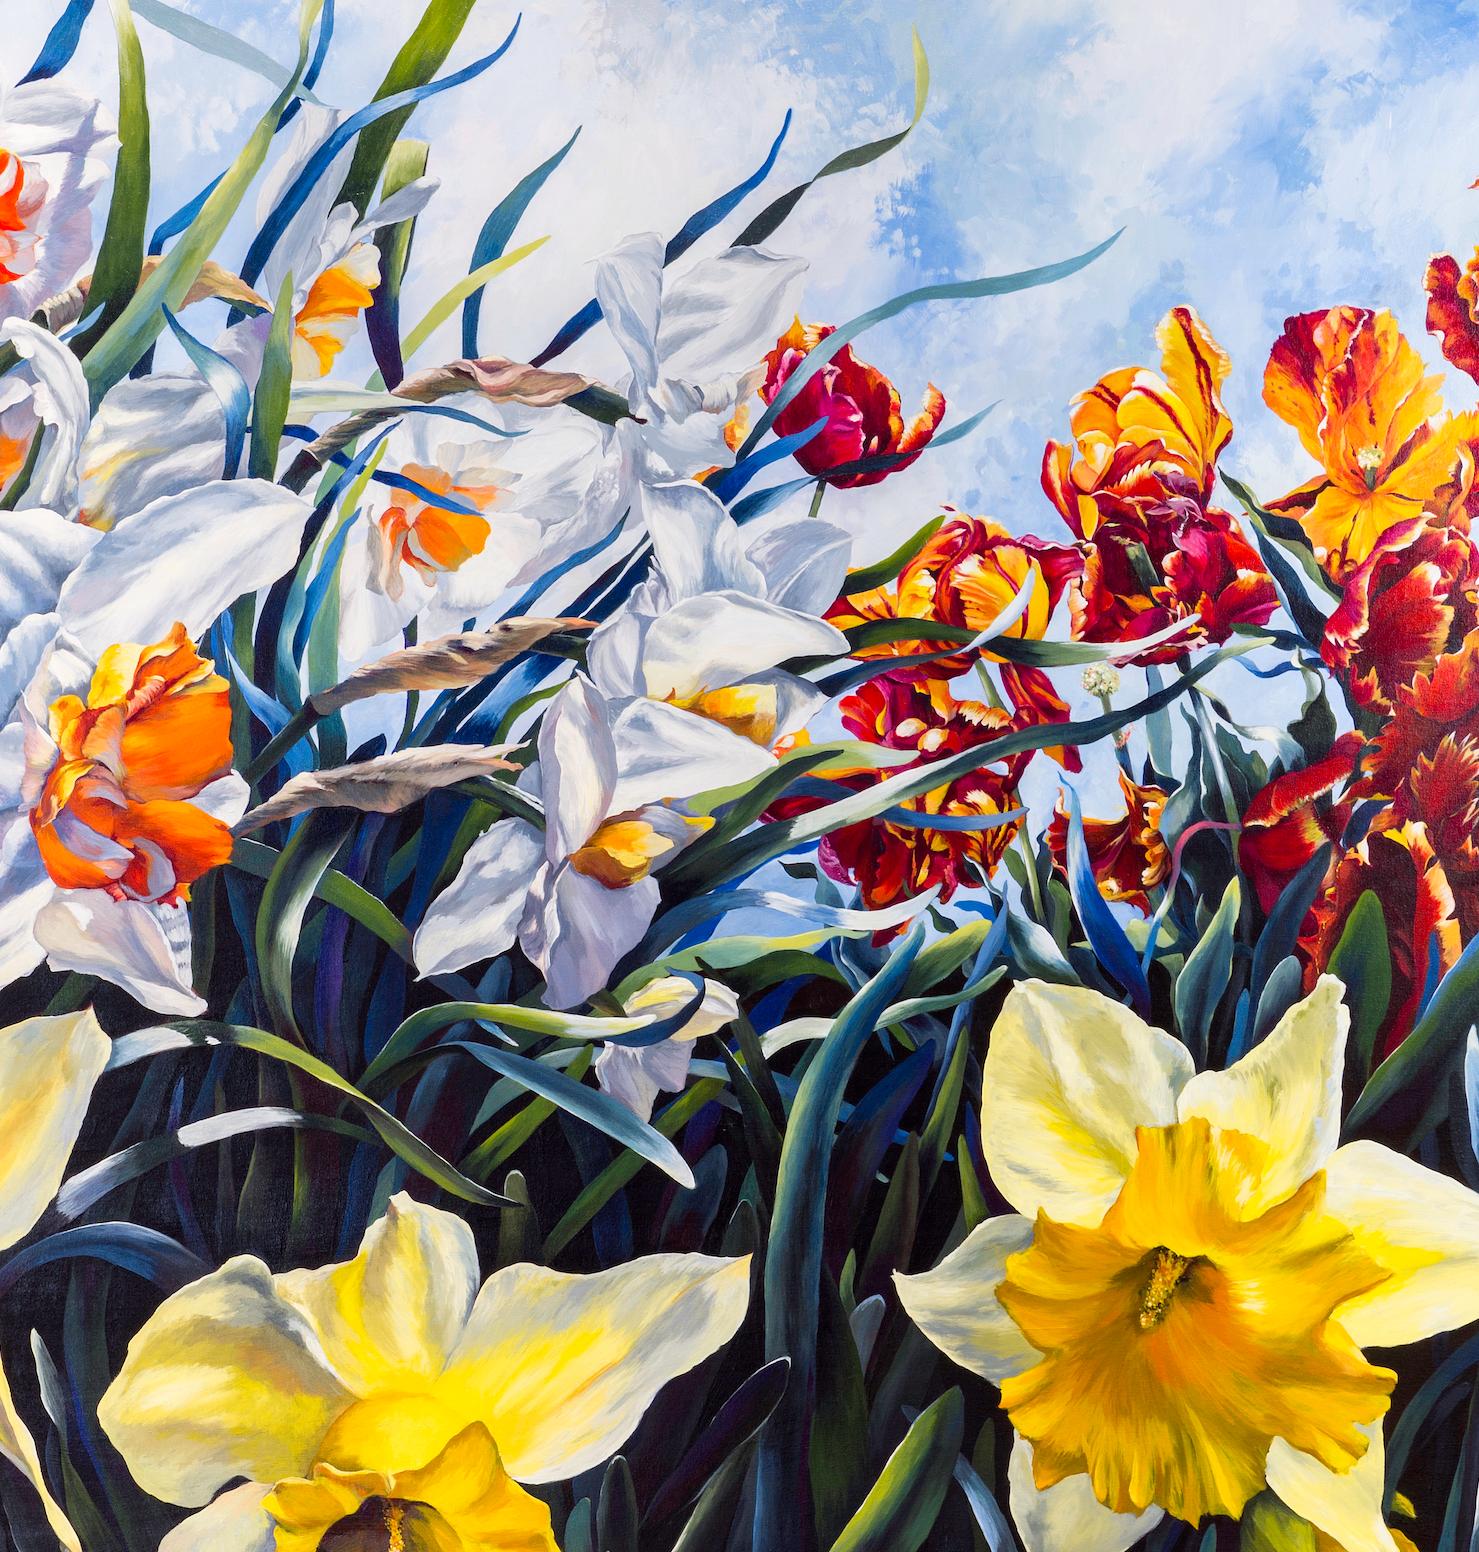 Dancing in the Light - A striking acrylic painting of large Daffodils and tulips - Painting by Amanda McPaul